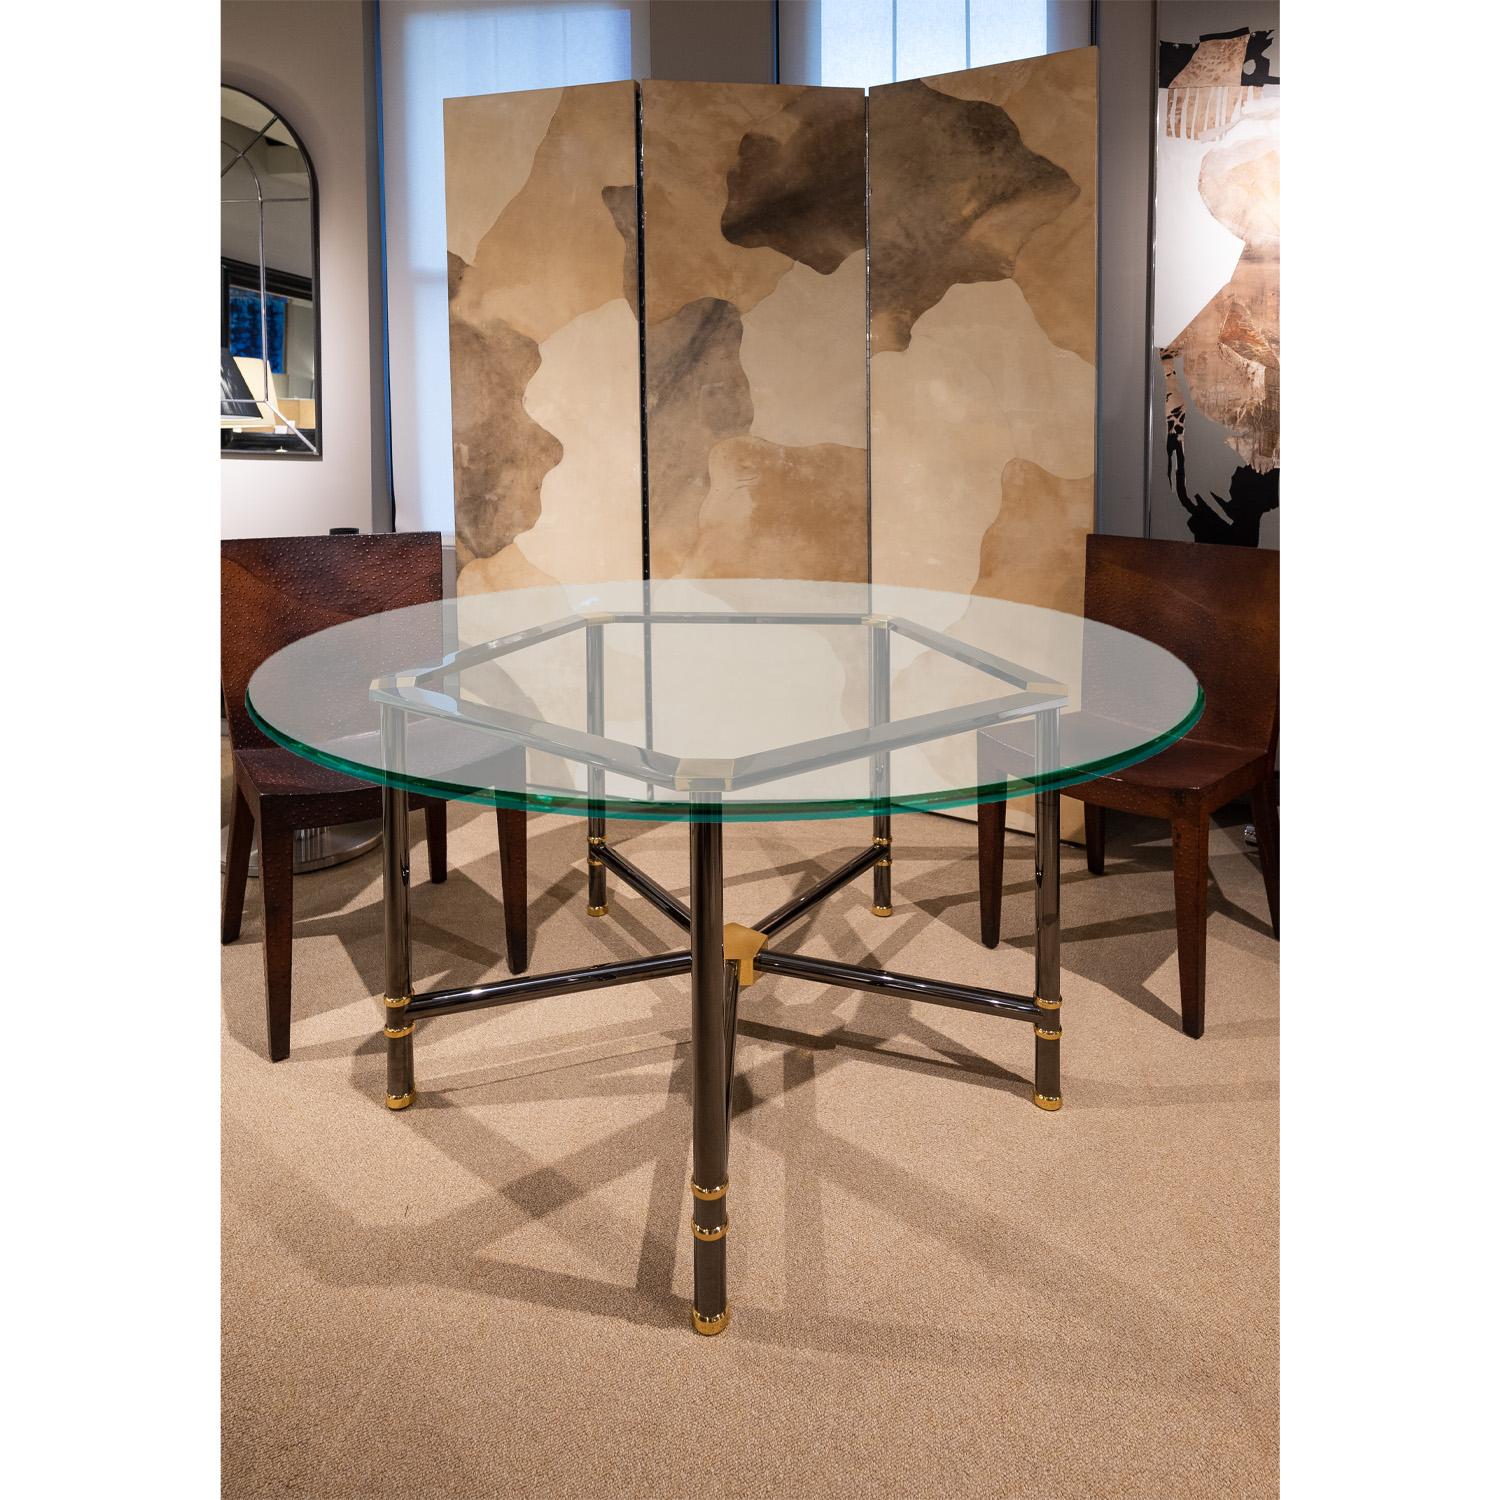 Late 20th Century Karl Springer Rare Jansen Style Table in Polished Gunmetal and Brass 1980s For Sale